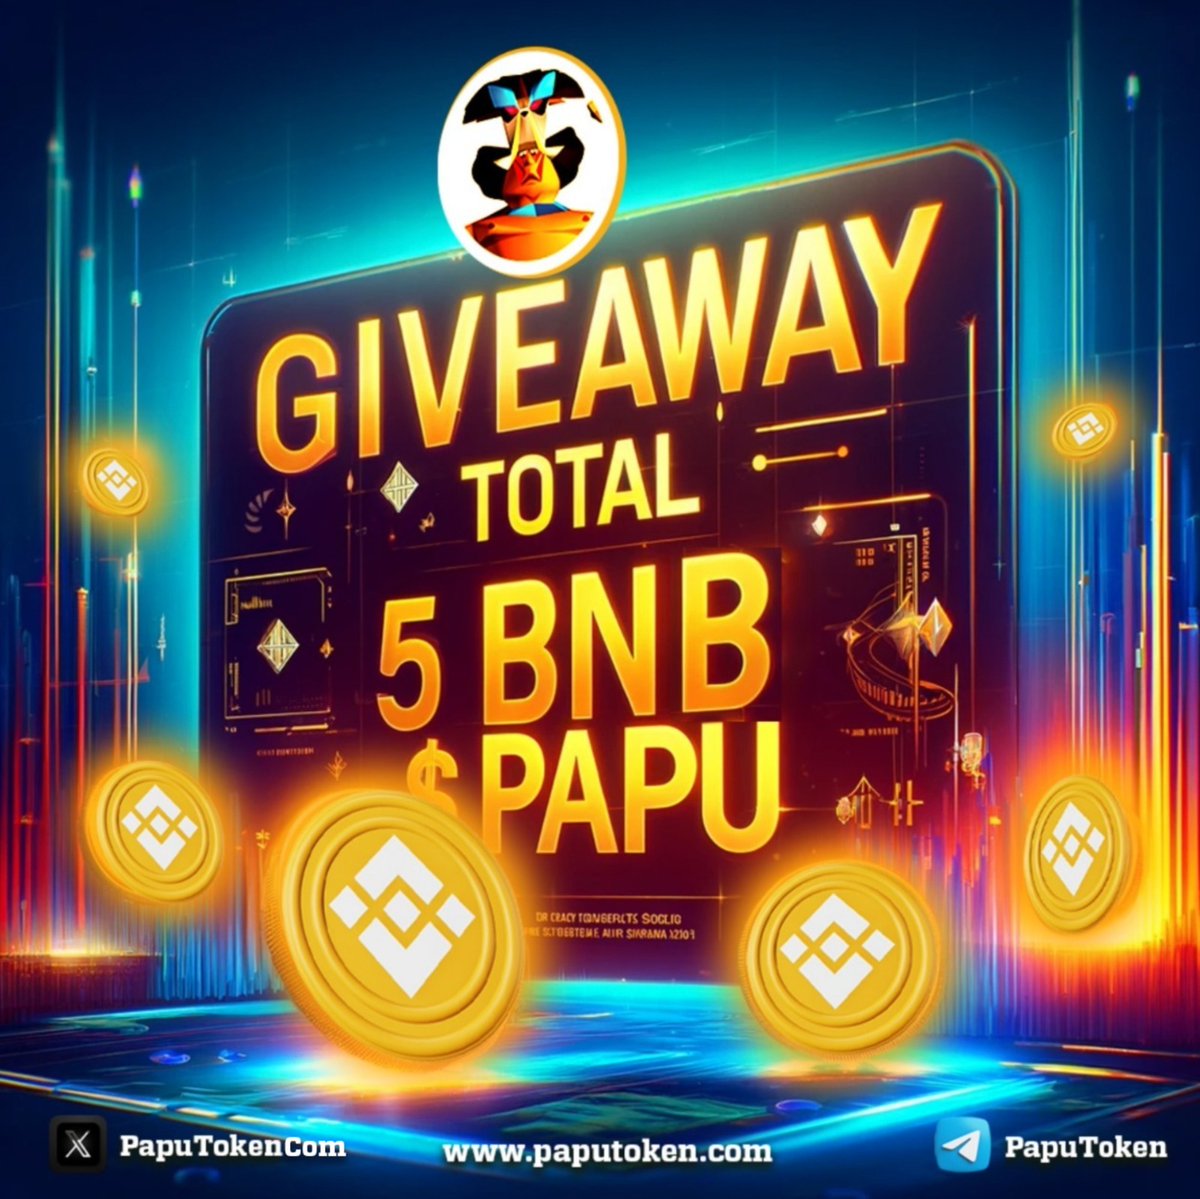 🎉🎁 BIG GIVEAWAY 5 #BNB  🎁🎉

🎉 $PAPU WILL GIVEAWAY 5 #BNB   to 50 lucky people!!!!🎉

STEP 1️⃣ : 💟 + 🔁 + Follow 
STEP 2️⃣ : Tag 2 friends and mention #PAPU 🗨

Project Info ; 🚀

@BNBCHAIN CA: 0x91dba2cd05c8a0227b48c3e426077145d23b21df

Trade : pancakeswap.finance/swap?outputCur…